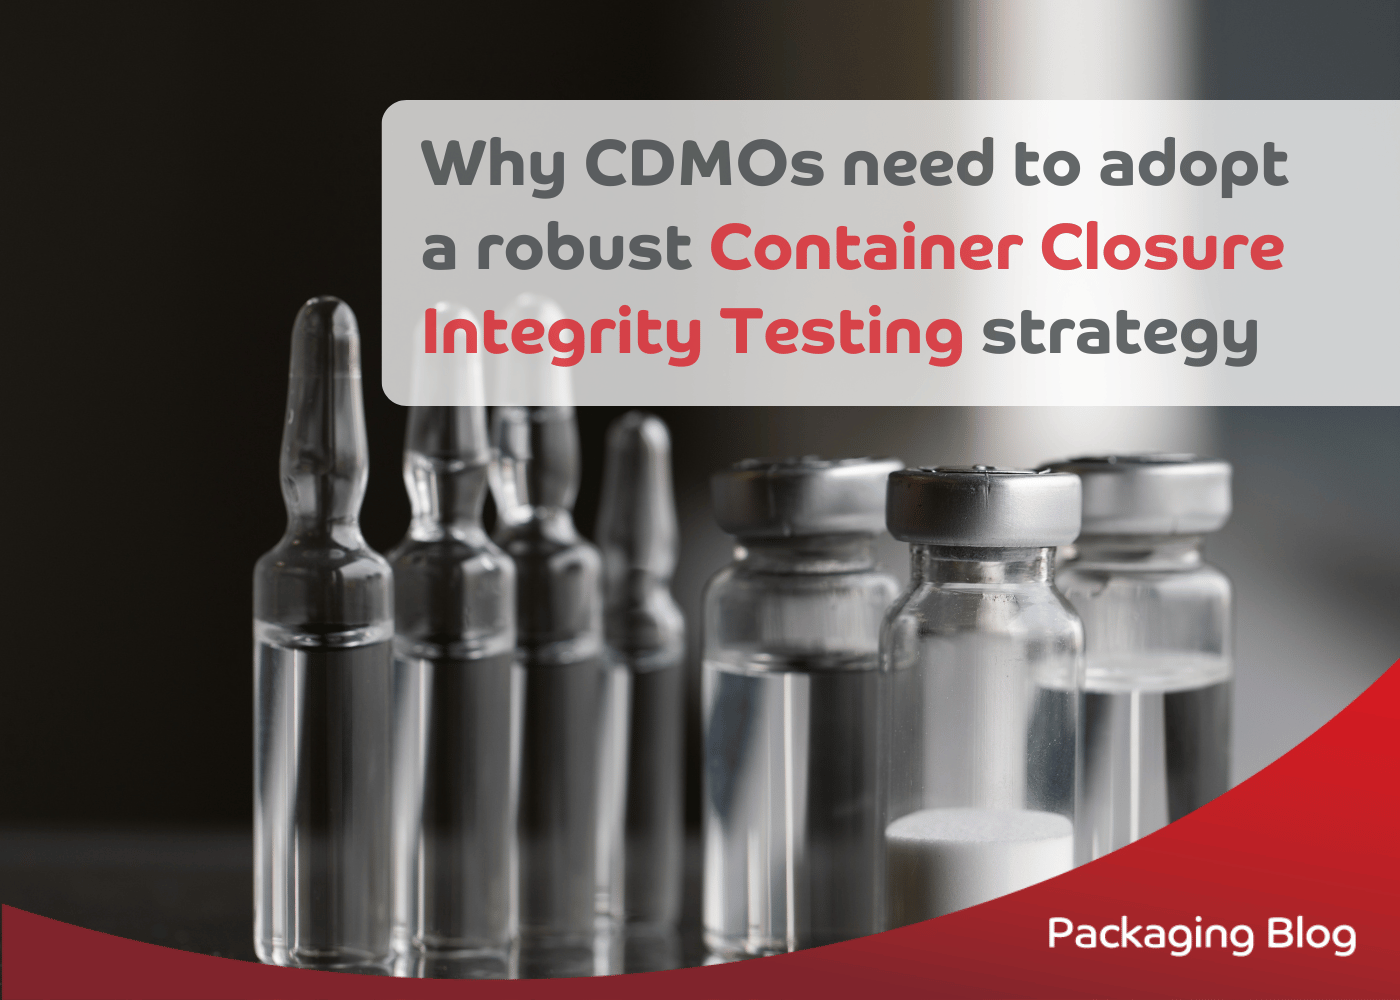 Why CDMOs need to adopt a robust Container Closure Integrity Testing strategy - Sepha blog